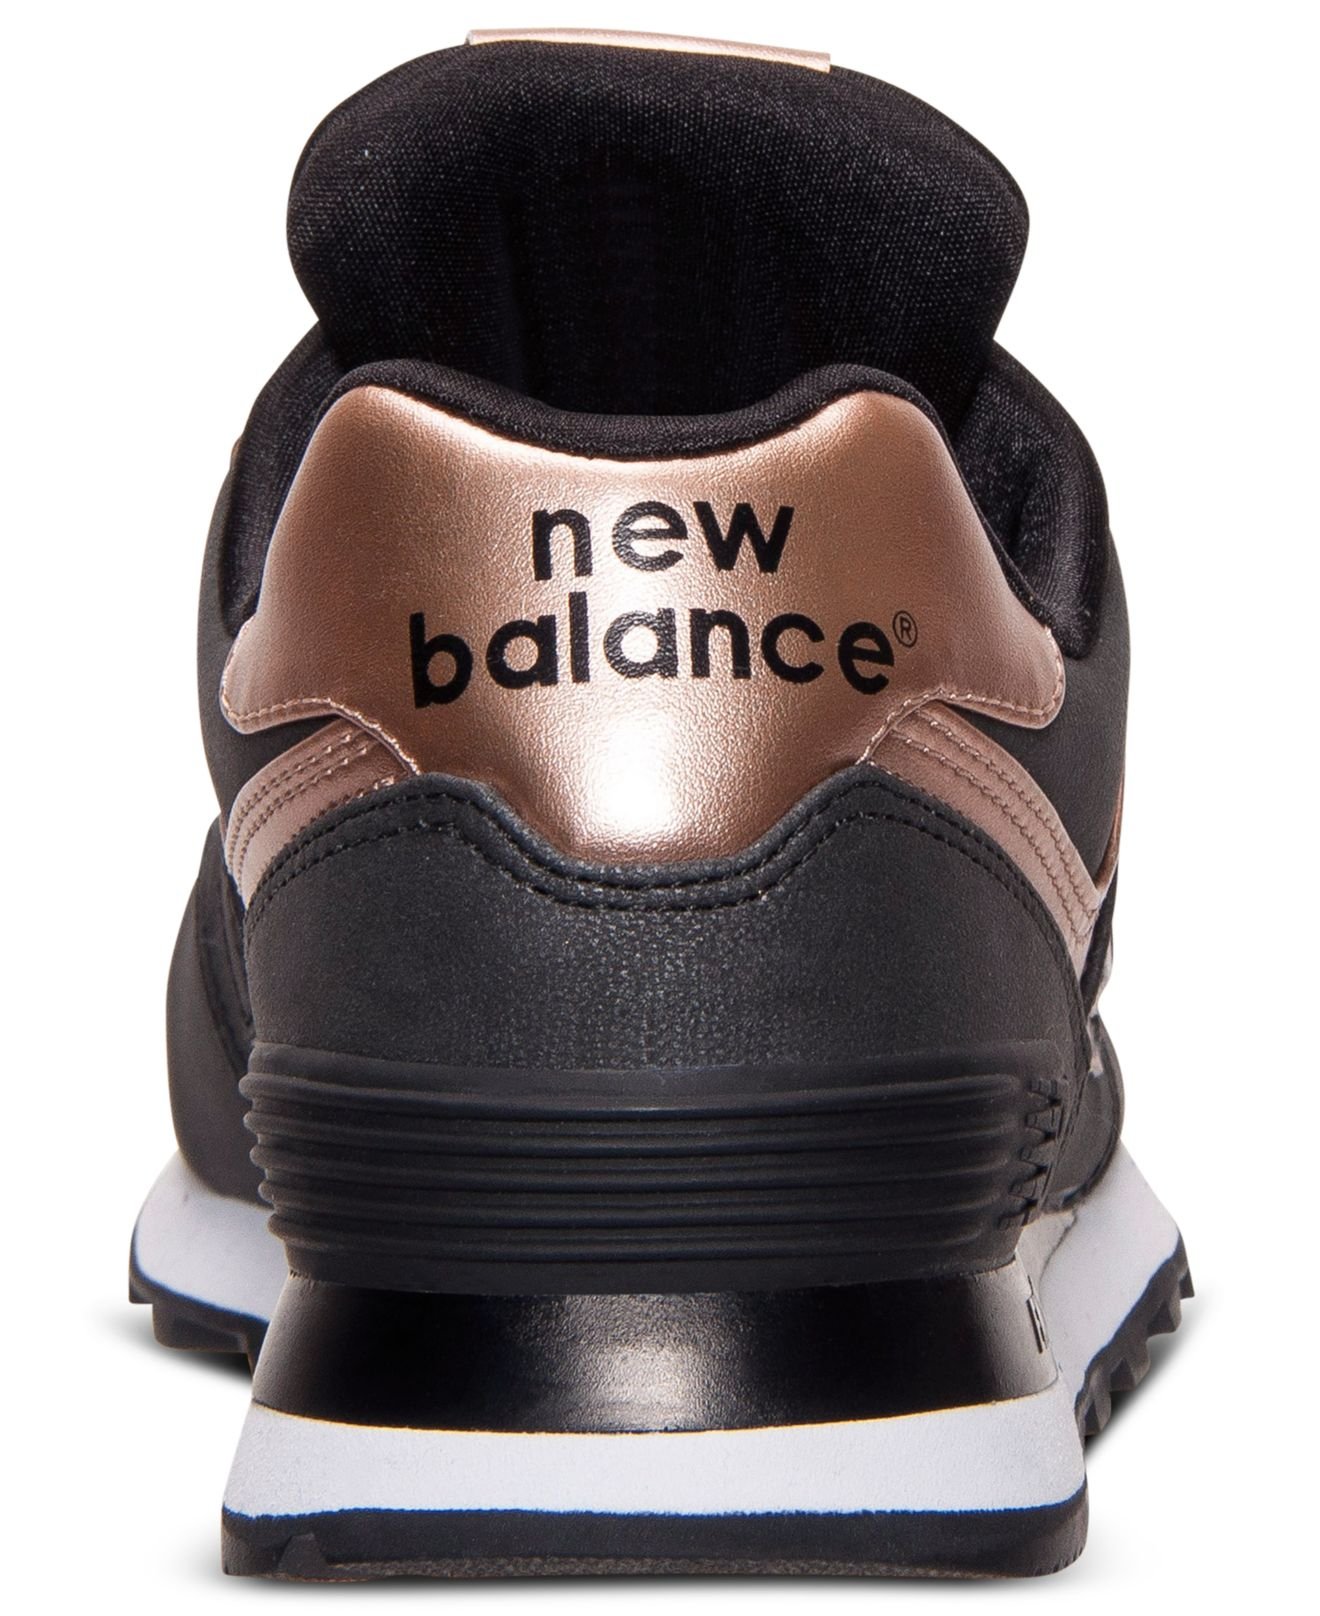 Lyst - New balance Women'S 574 Precious Metals Casual Sneakers From